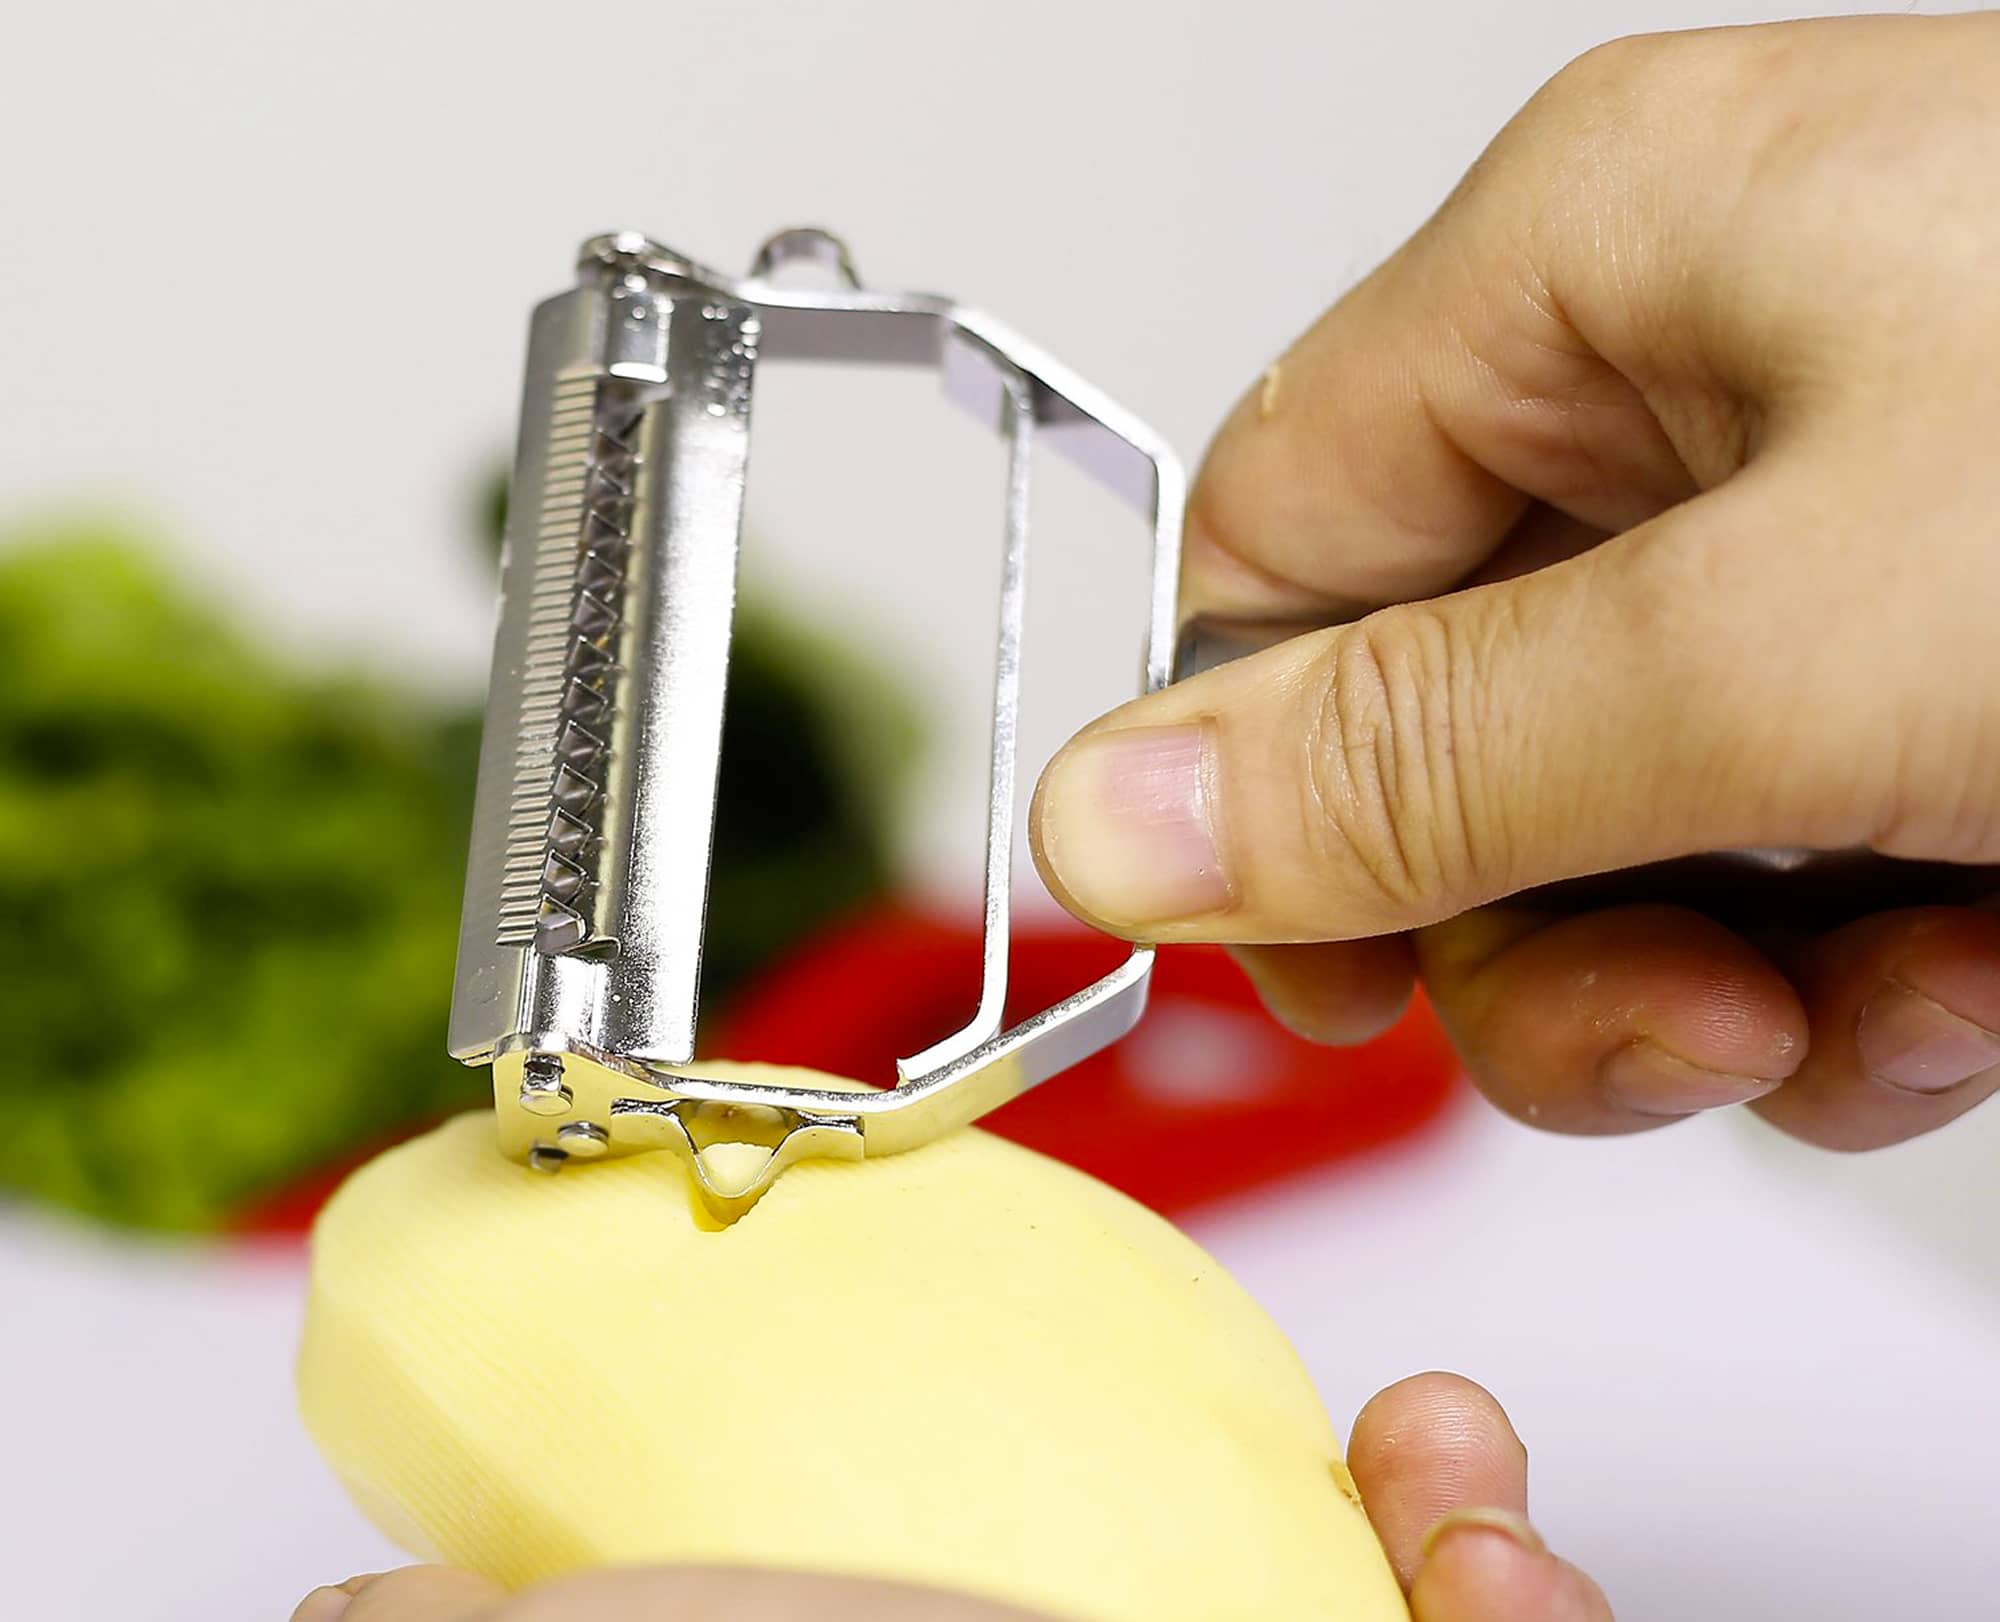 Using Benchusch double blade peeler to scoop out potato sprout eyes